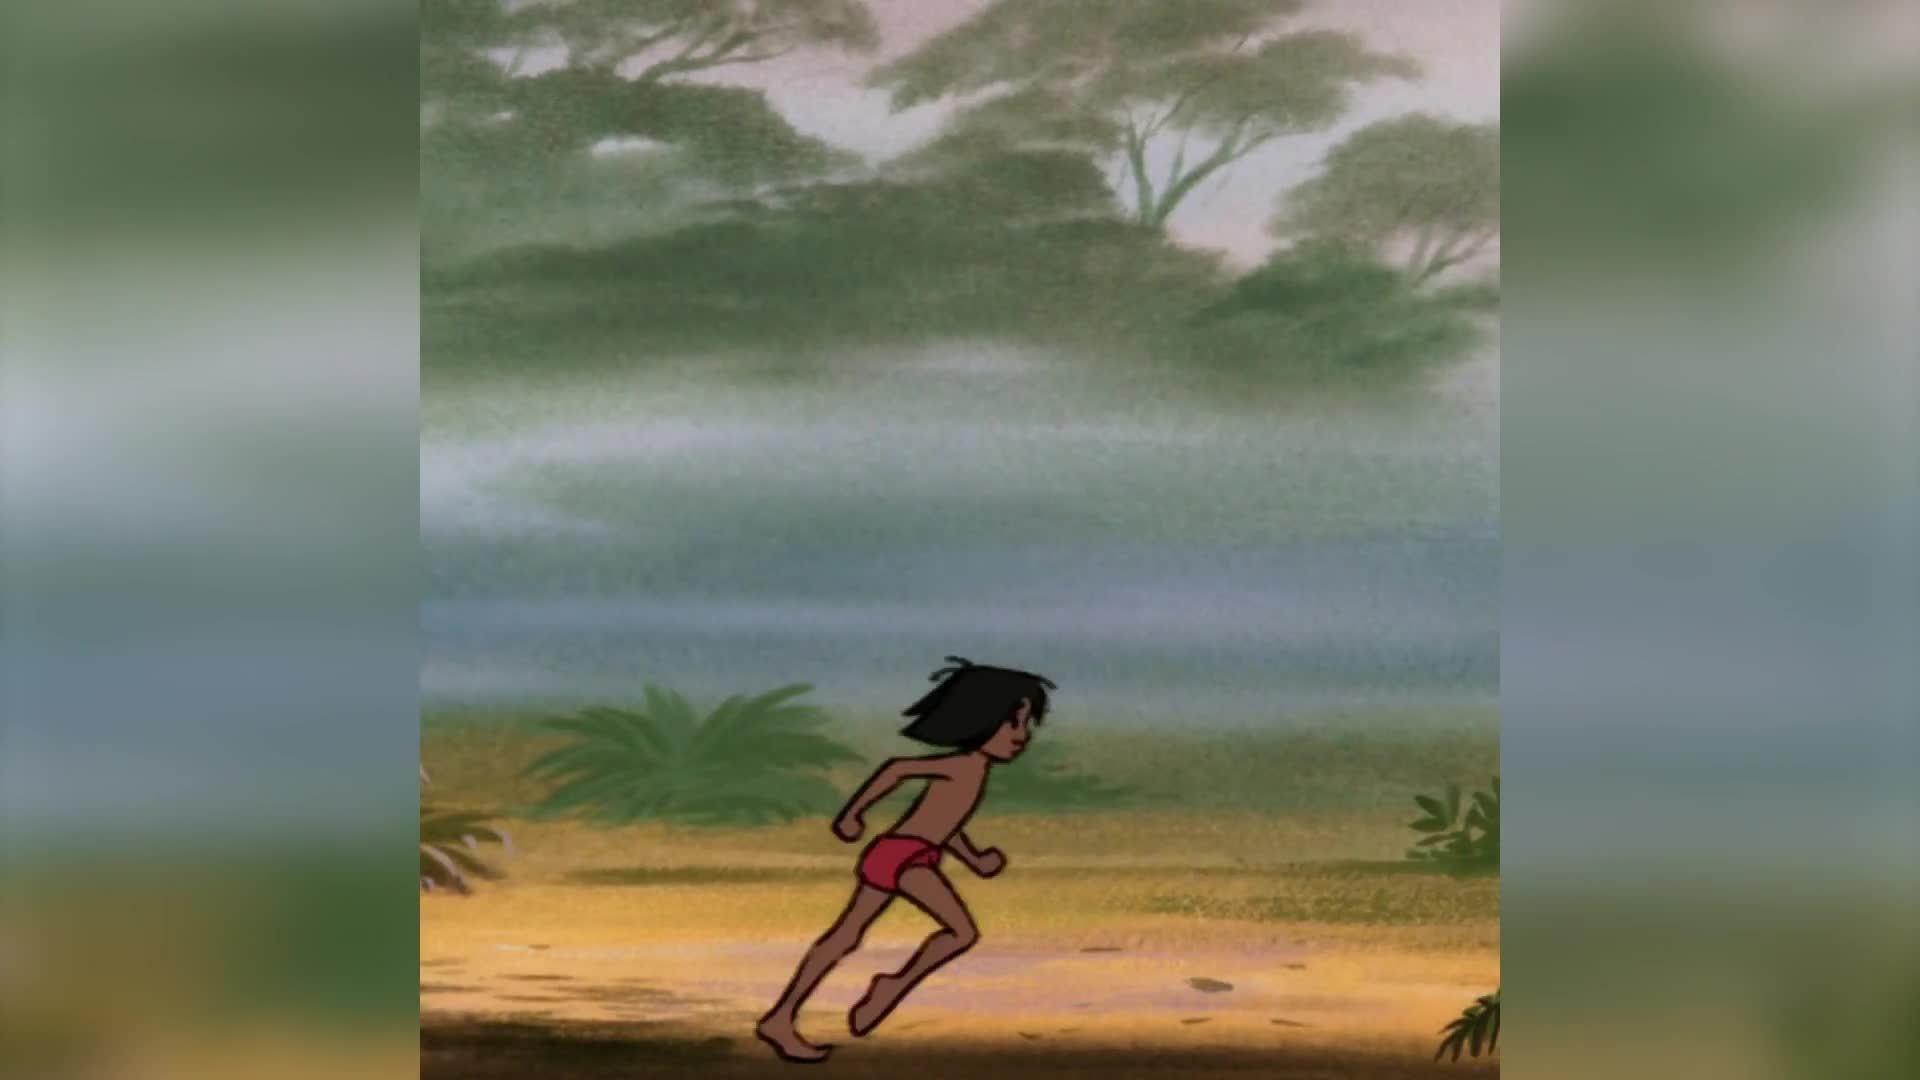 This Day in Disney History: The Jungle Book (1967)